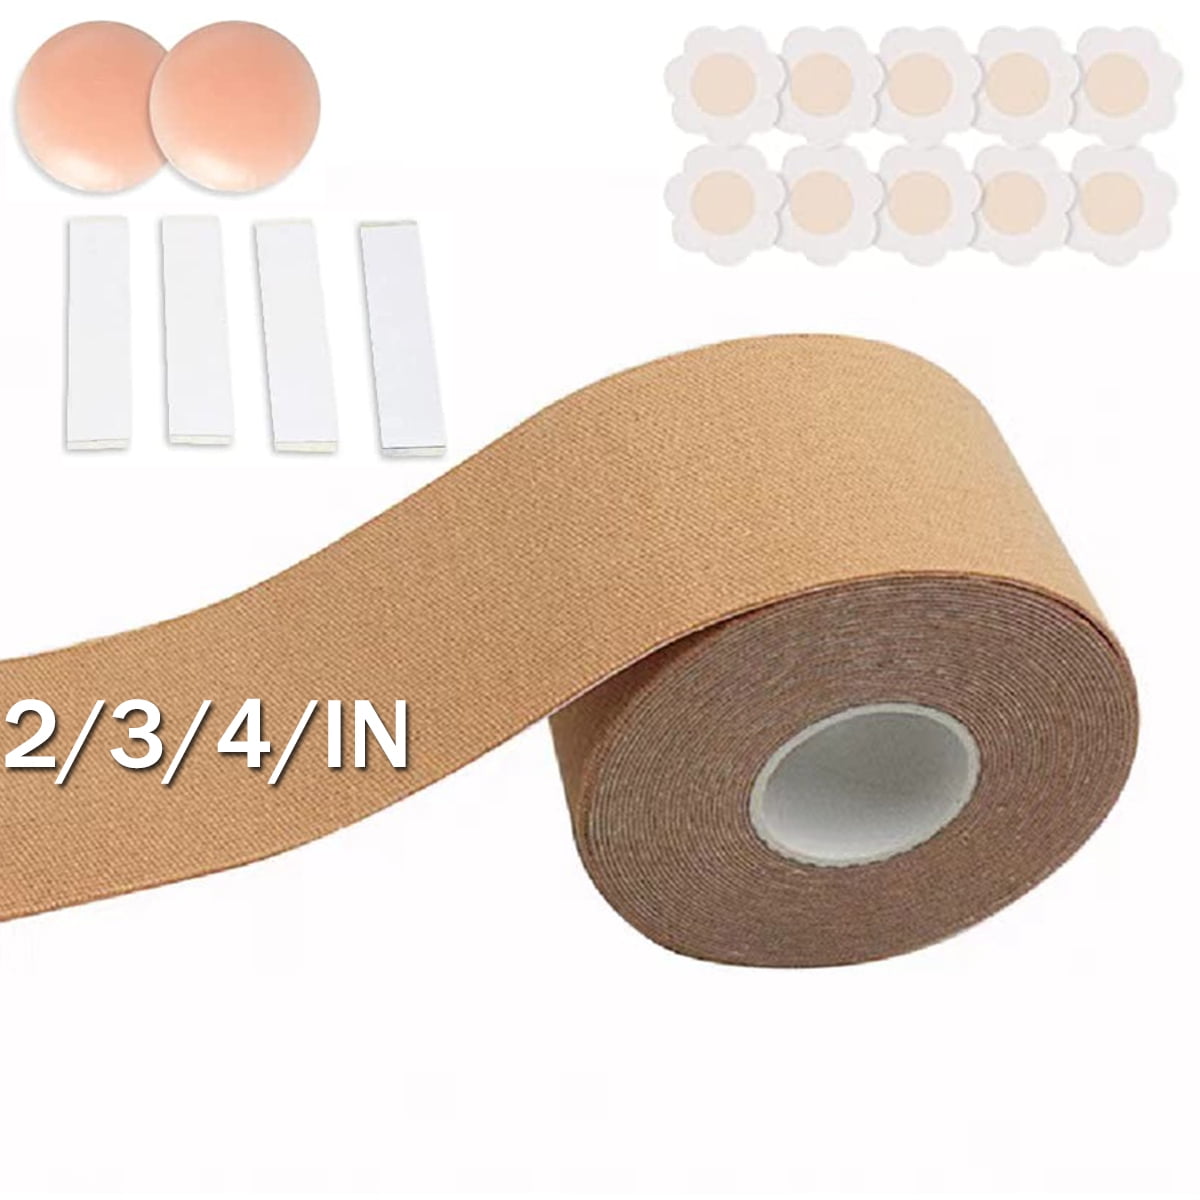  Boob Tape Boobtape, 3 Extra Wide Bob Tape For Large